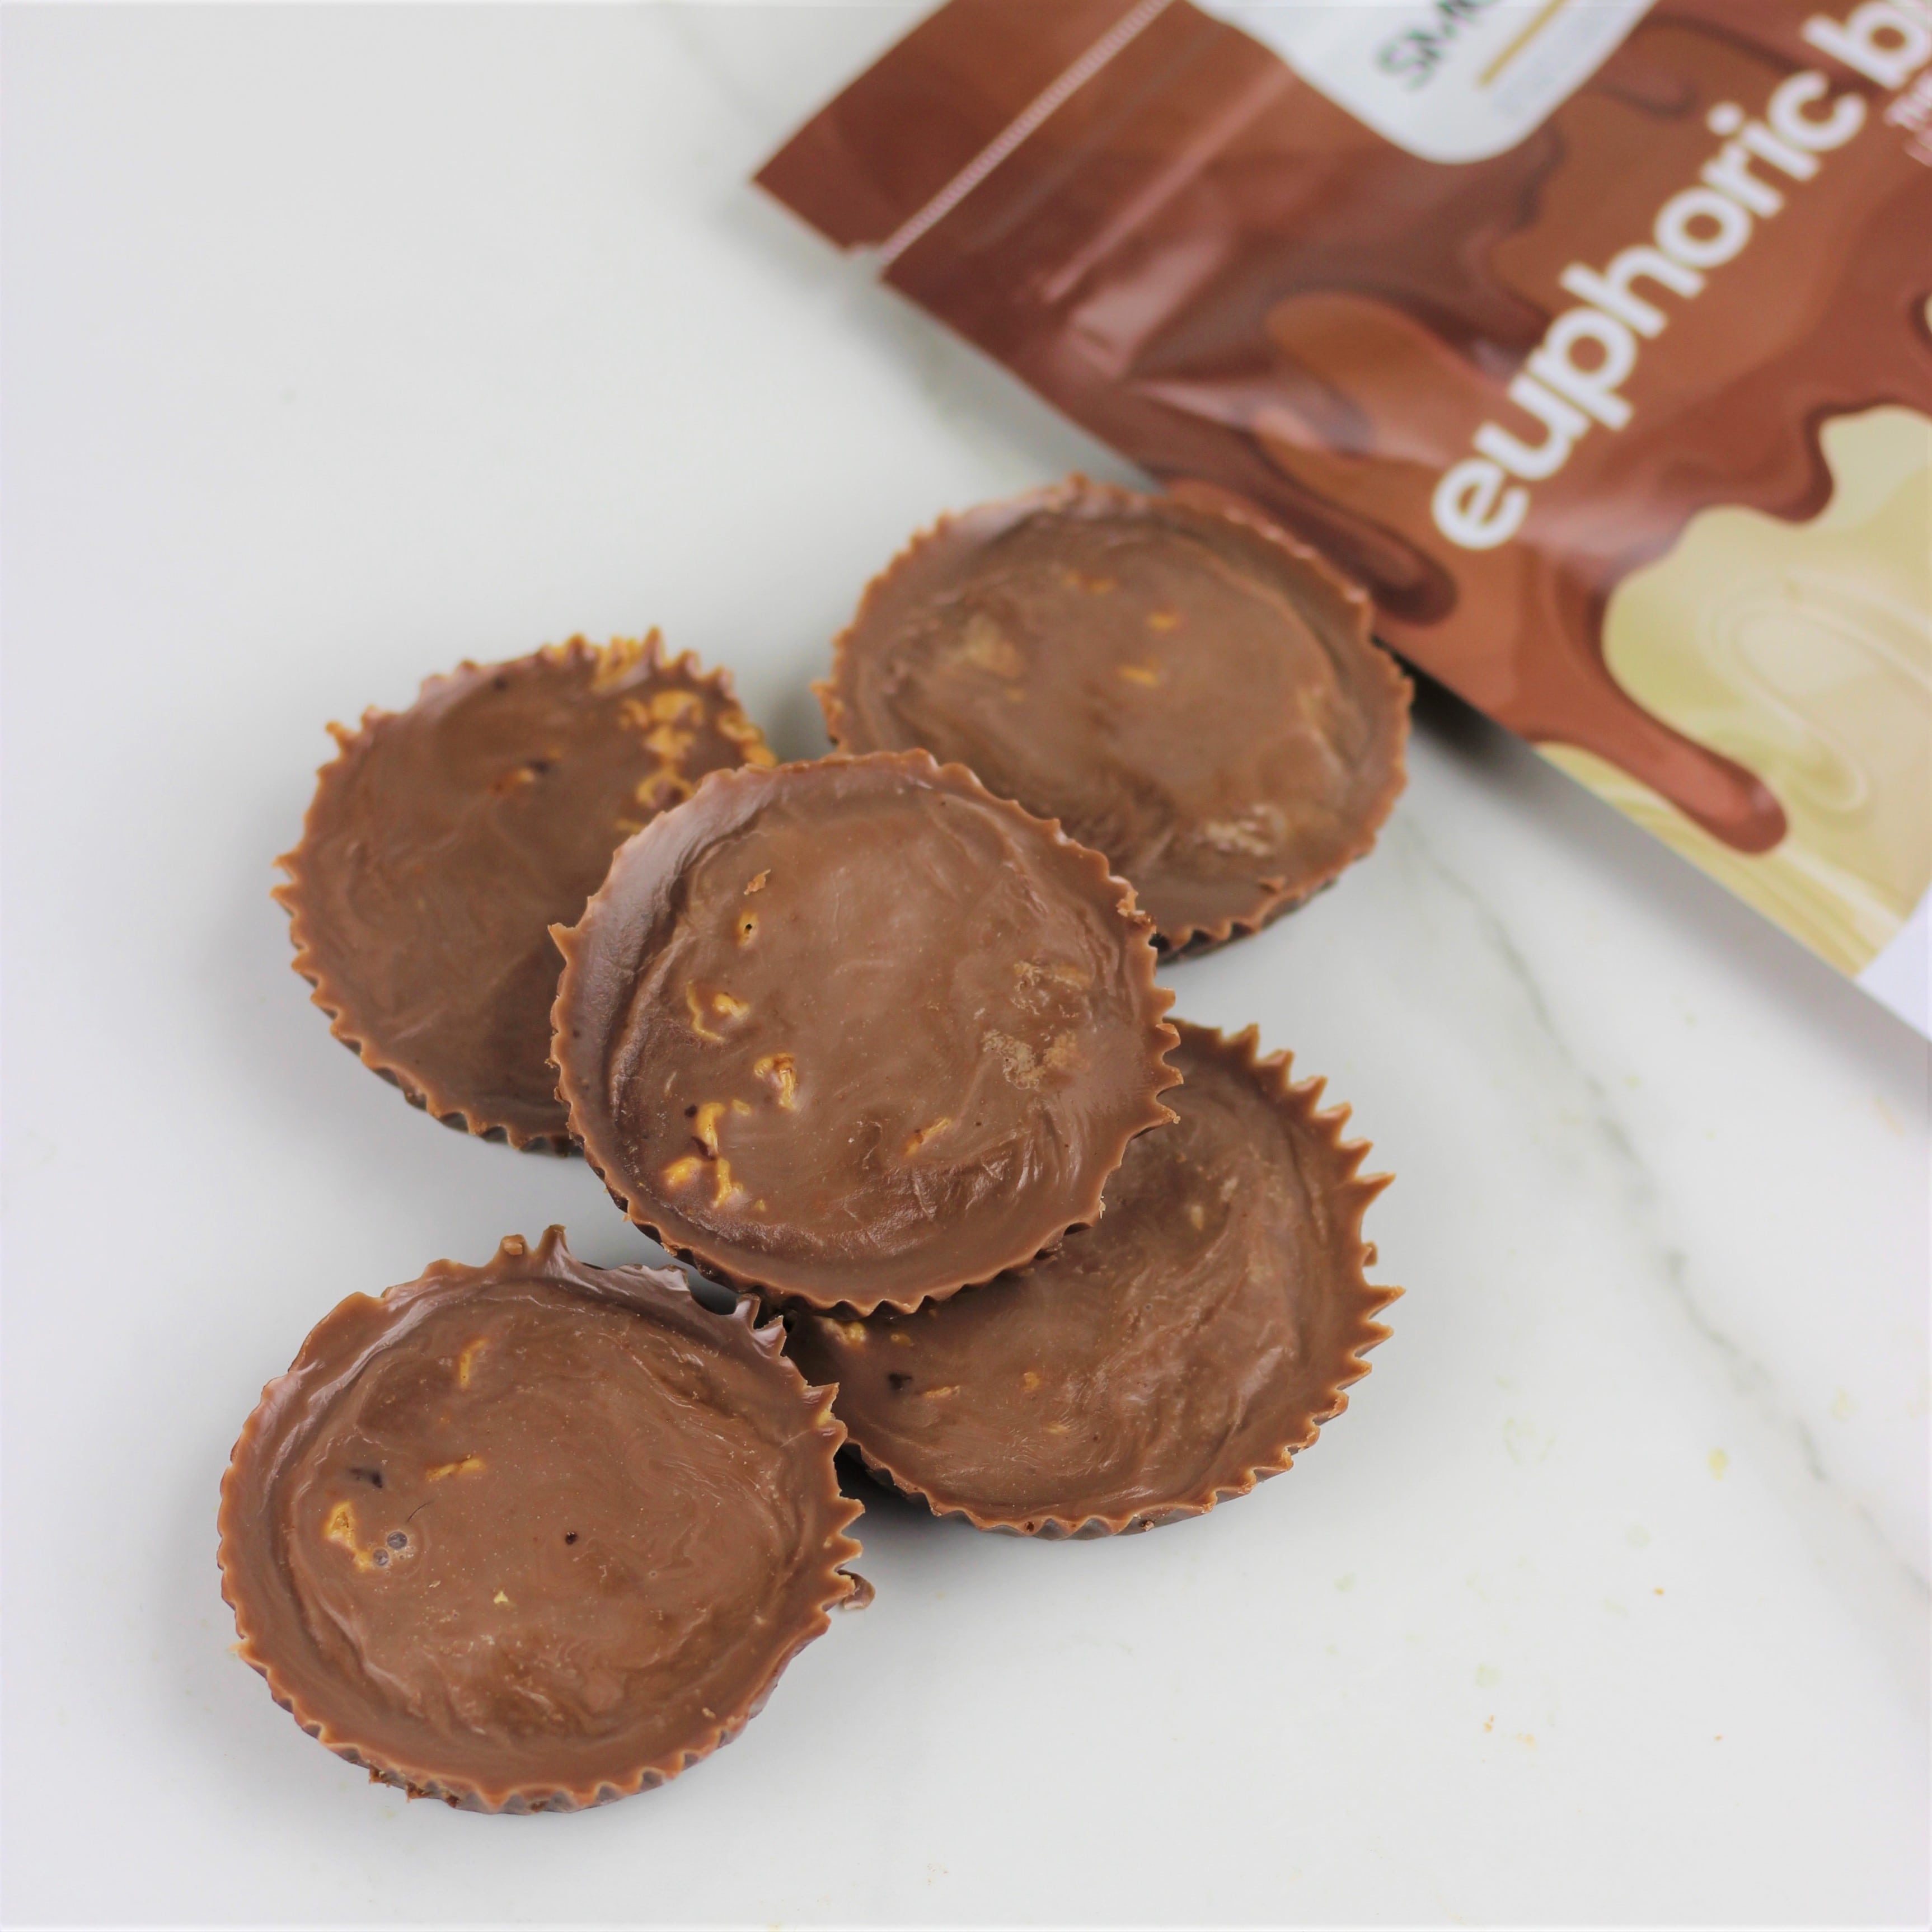 SMOOV euphoric blend has 6 powerful and delicious foods packed with antioxidants, healthy fats and adaptogens- Raw cacao, Carob, Mesquite, Maca, Lucuma and shredded Coconut. A healthy way to satisfy cravings and boost mood instantly!